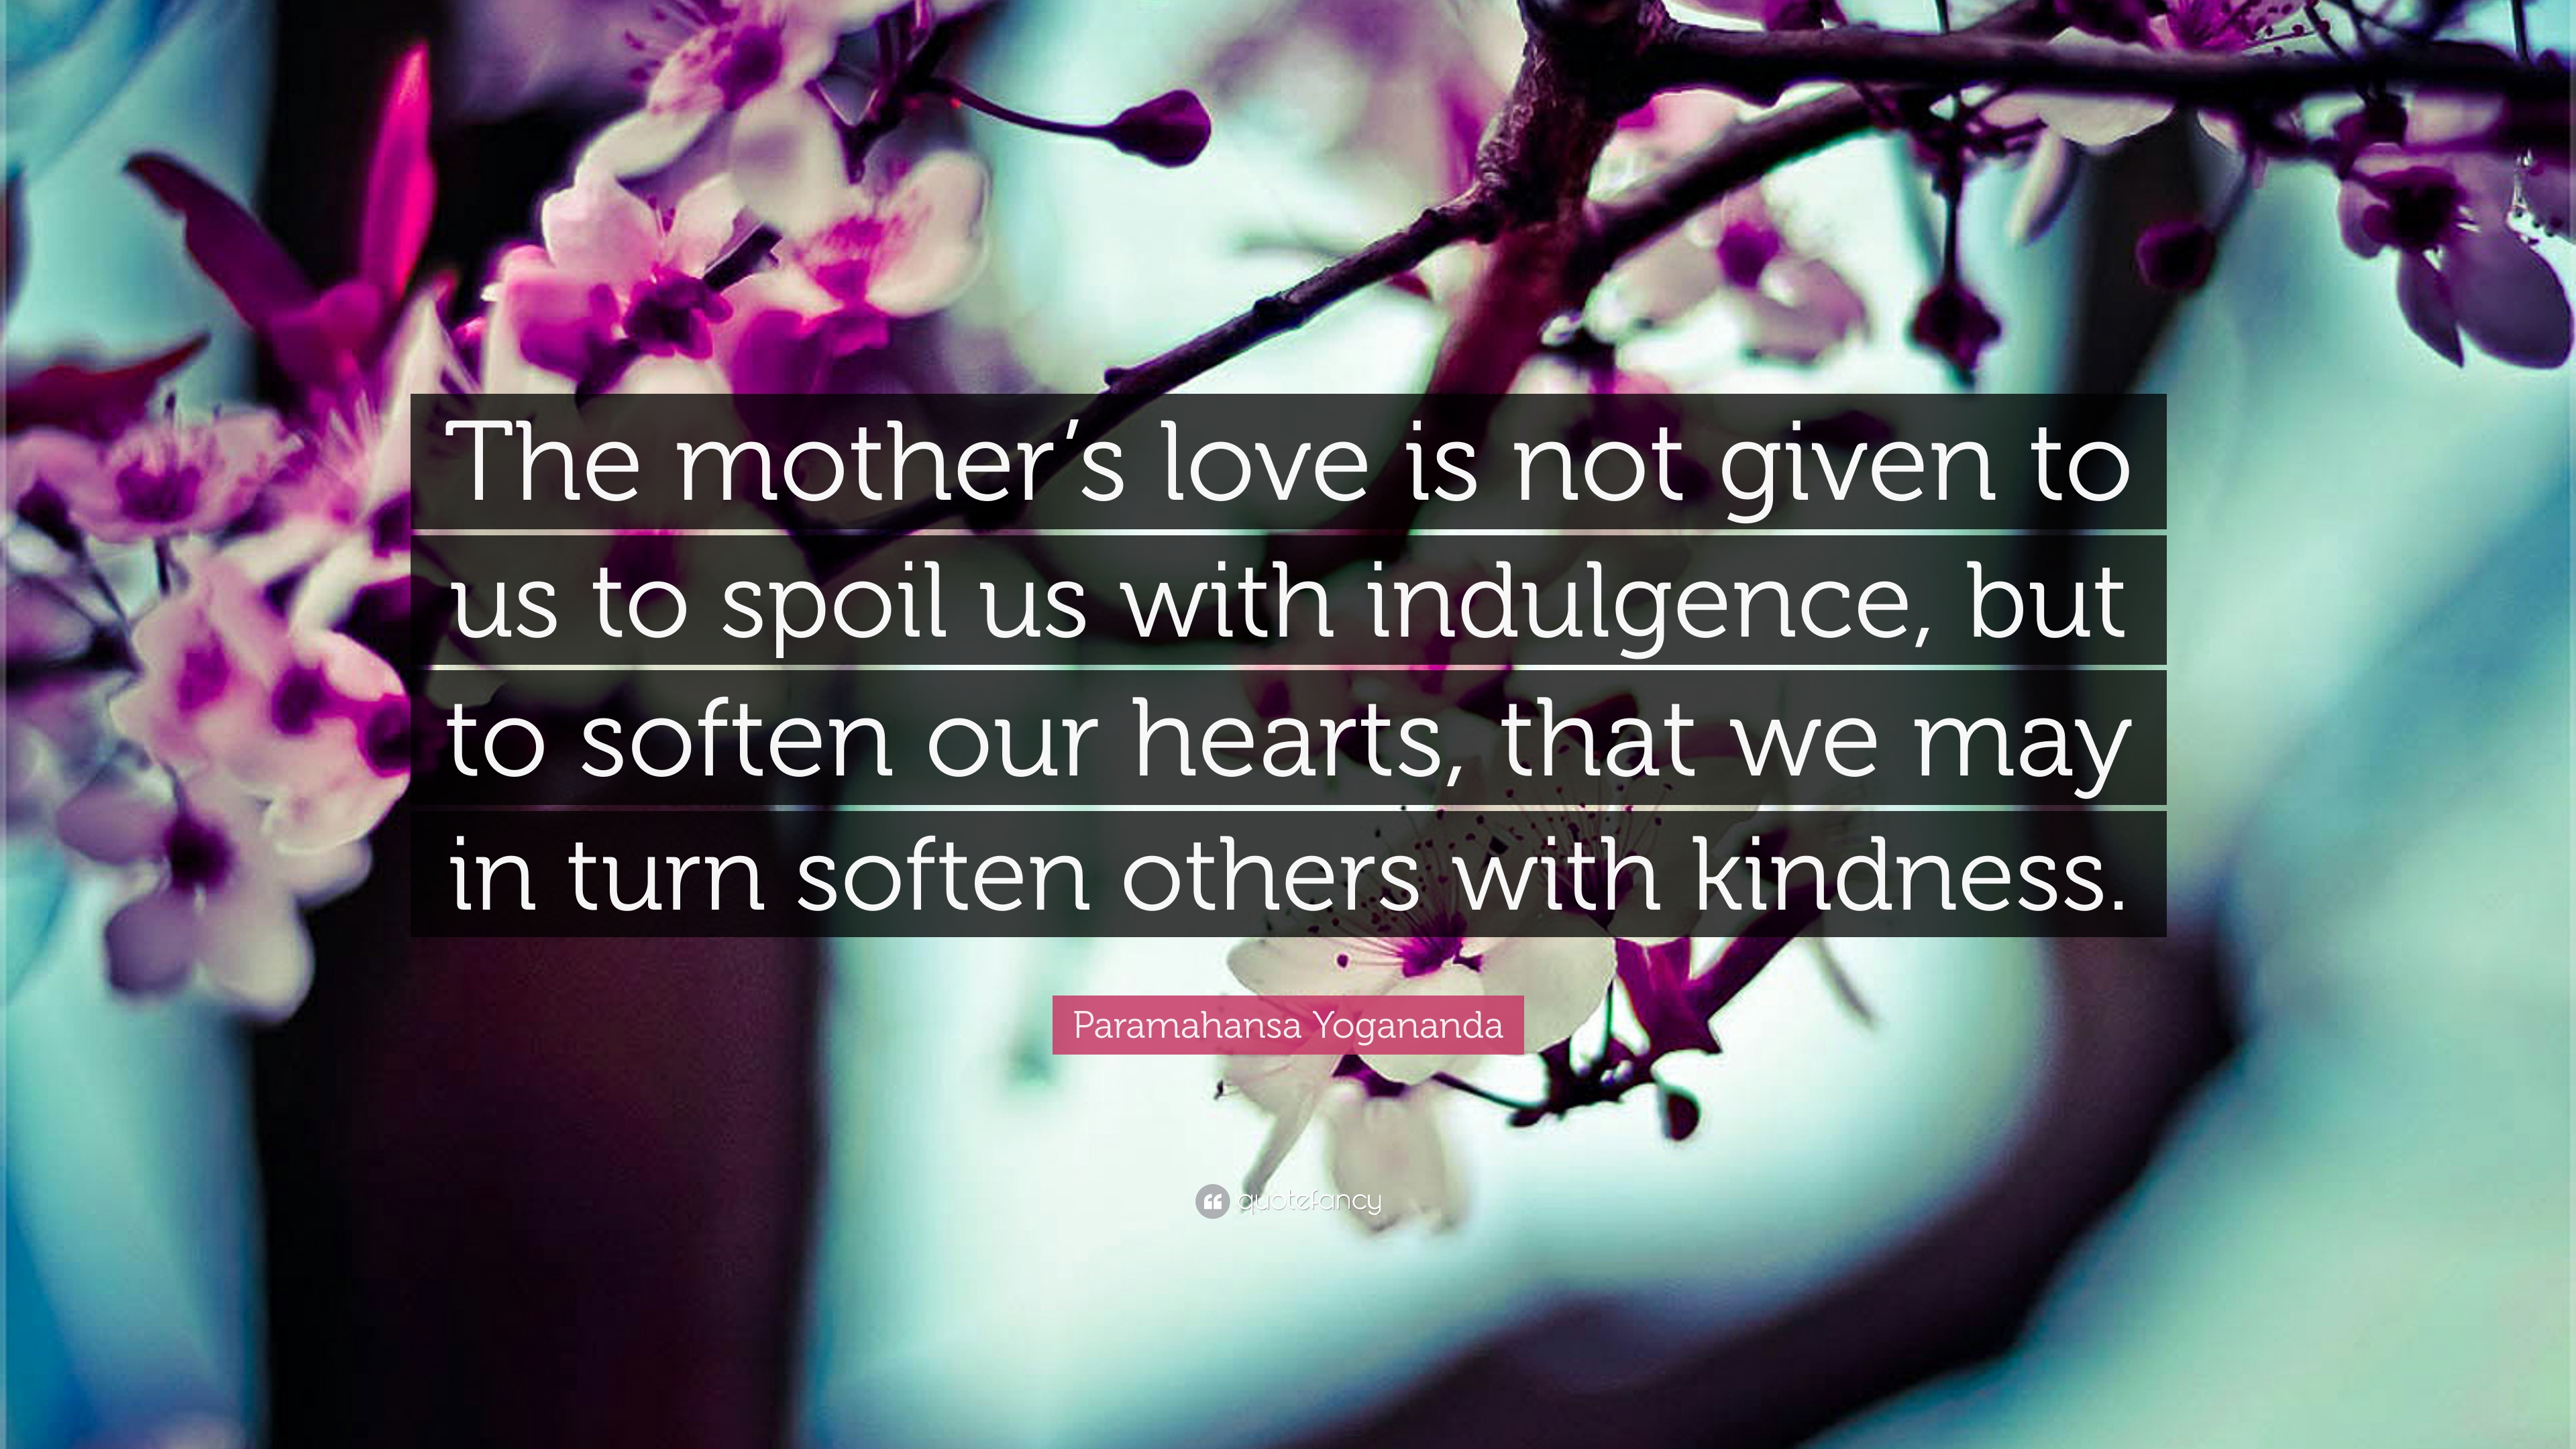 Paramahansa Yogananda Quote: “The mother's love is not given to us ...